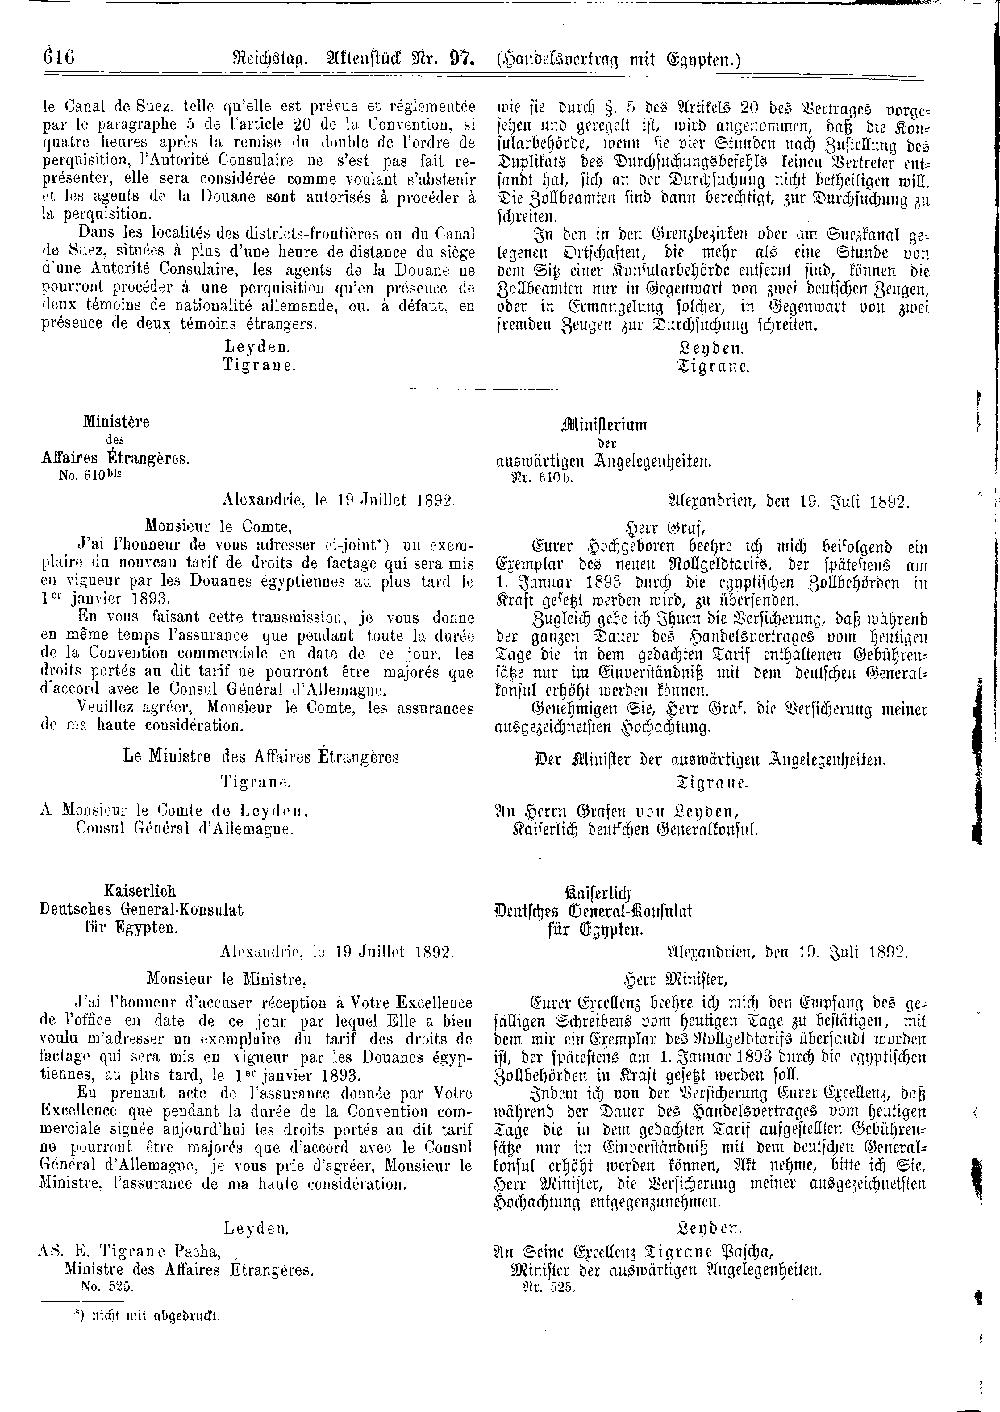 Scan of page 616